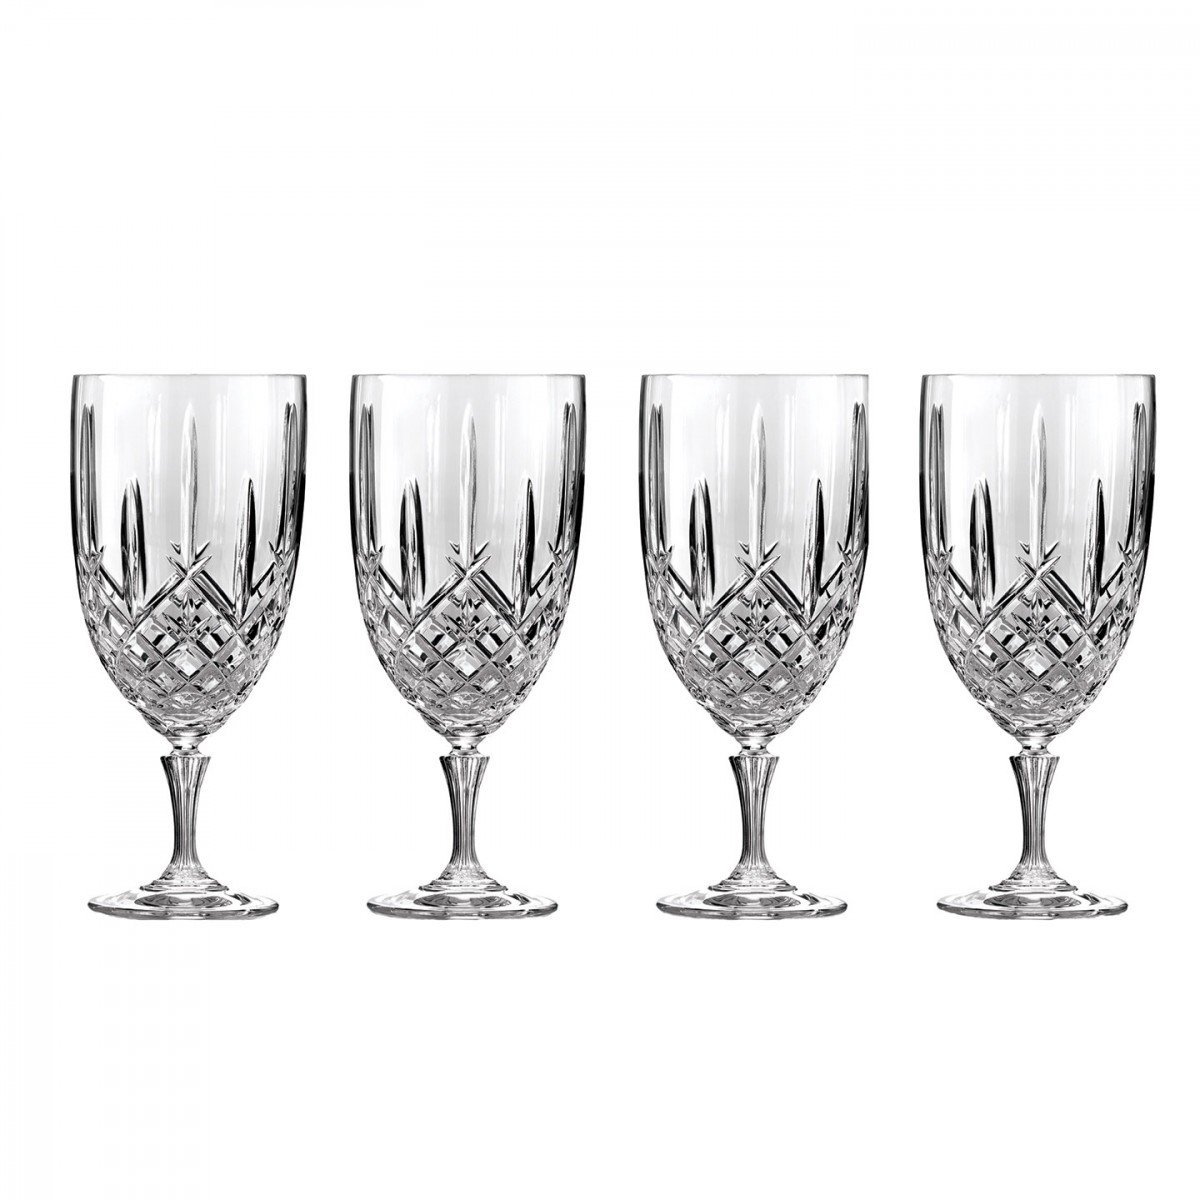 Marquis by Waterford Markham Iced Beverage, Set of 4